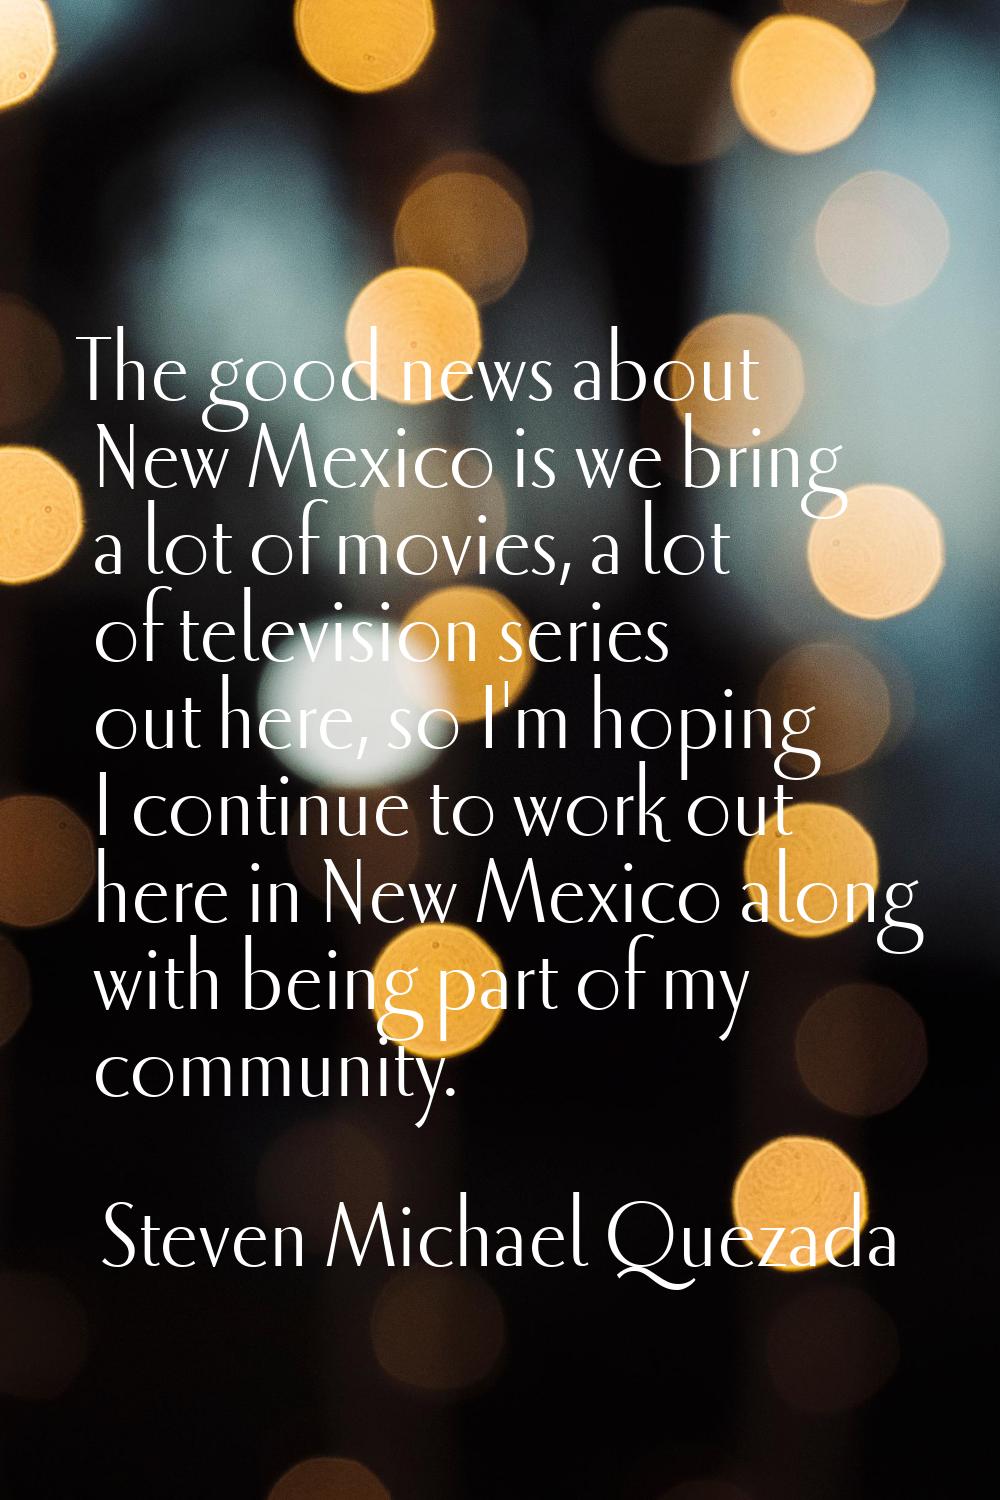 The good news about New Mexico is we bring a lot of movies, a lot of television series out here, so